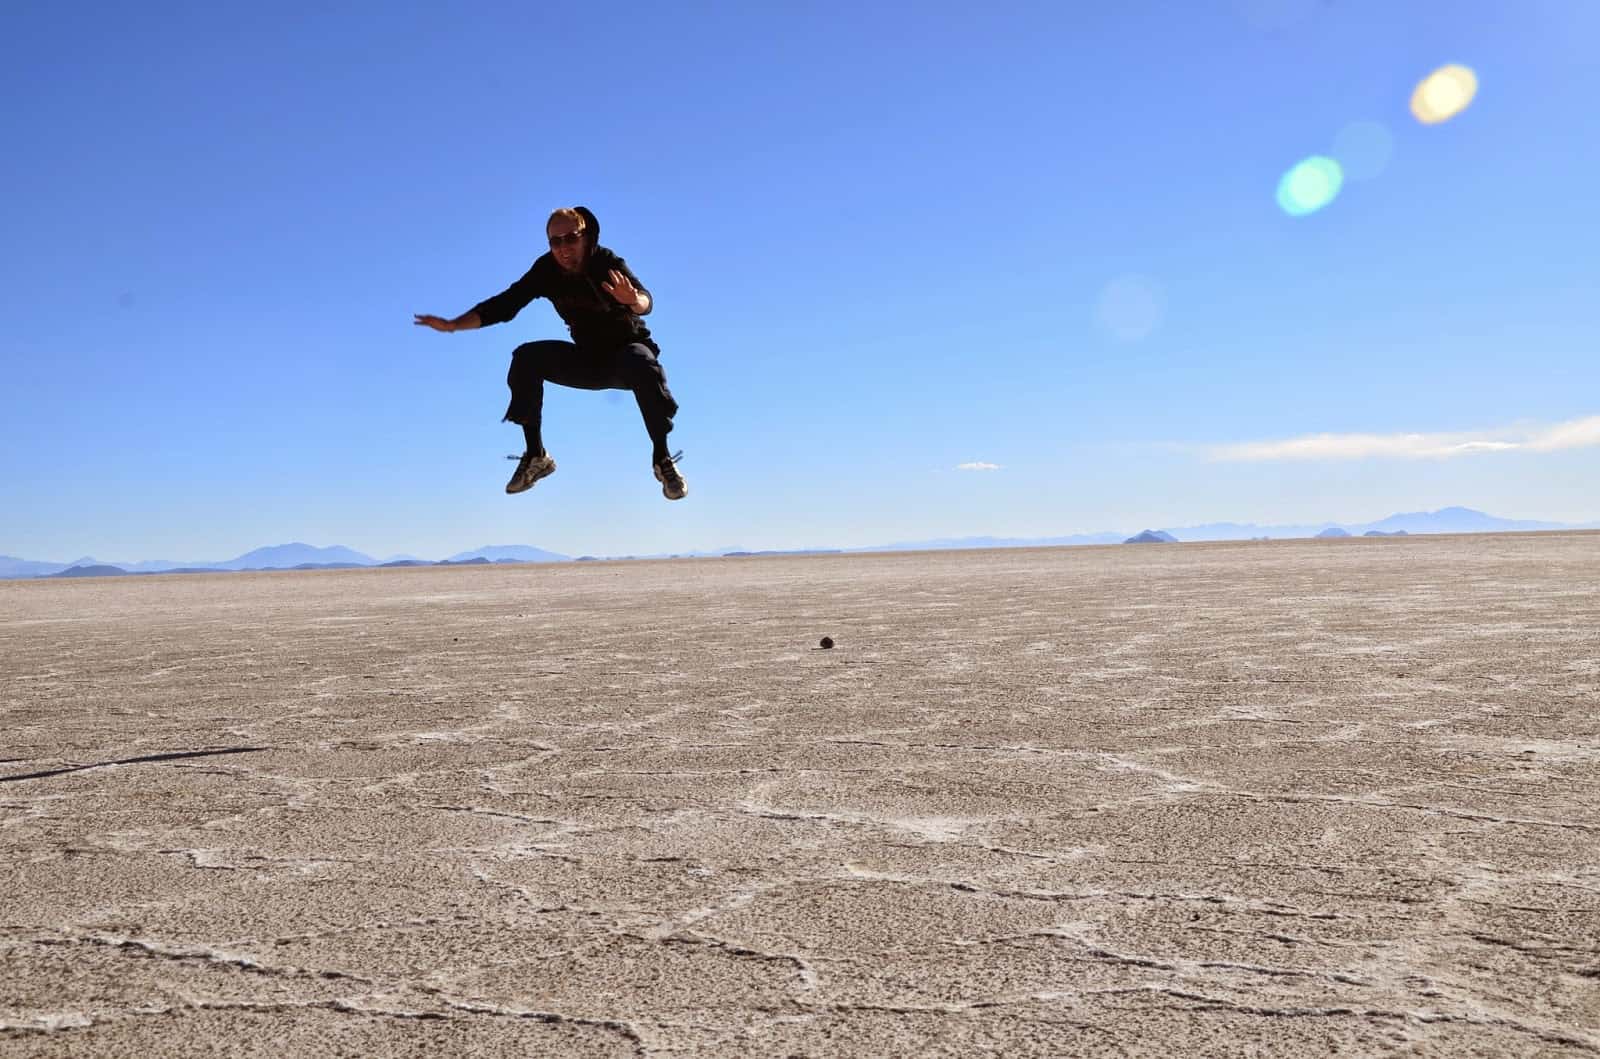 I was supposed to be here but got stuck in Uyuni instead, Bolivia